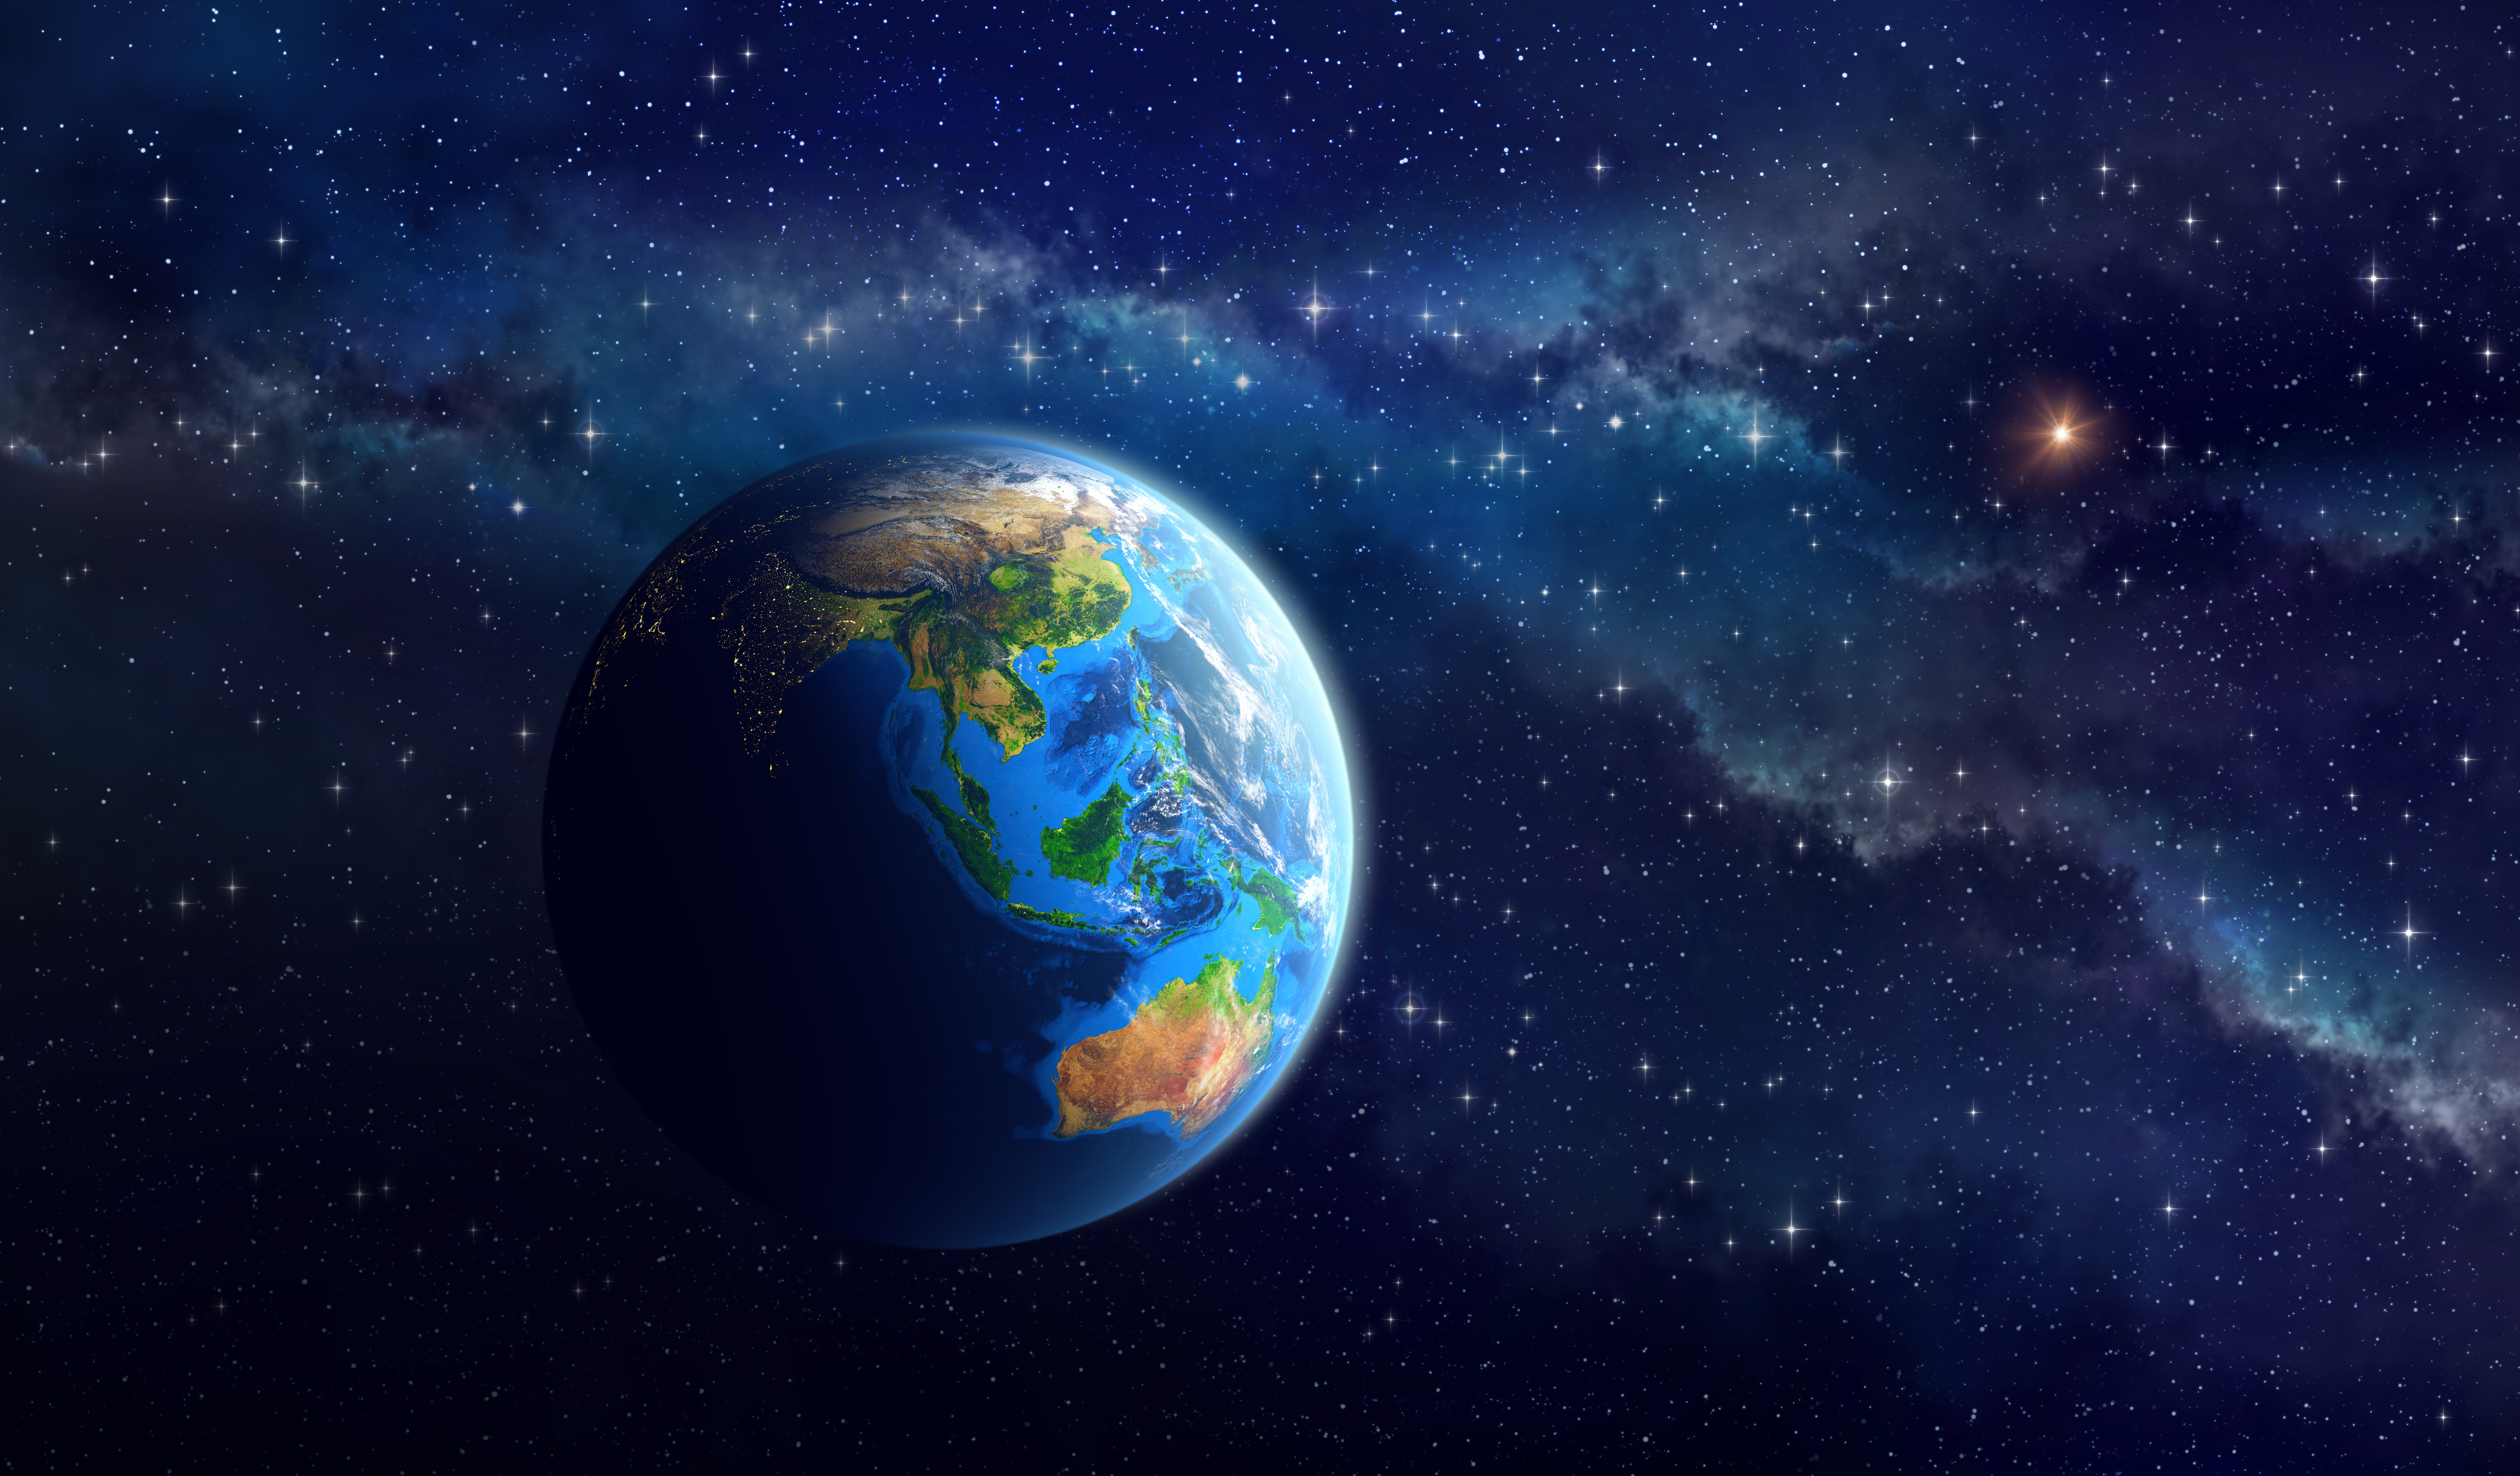 Earth From Space 10518x6161